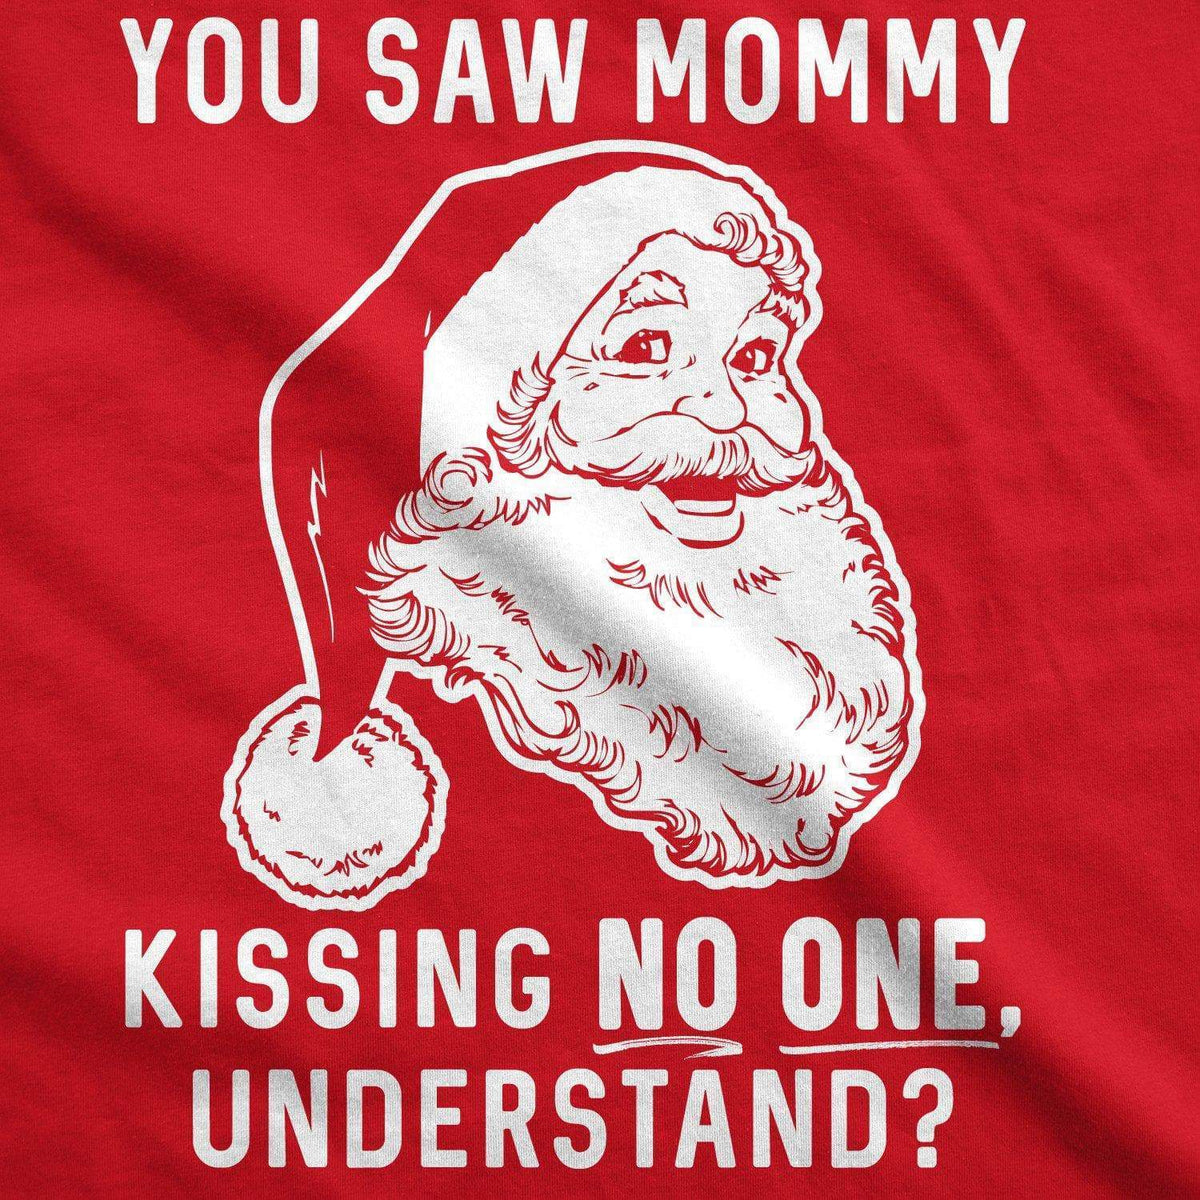 You Saw Mommy Kissing No One, Understand Men&#39;s Tshirt - Crazy Dog T-Shirts